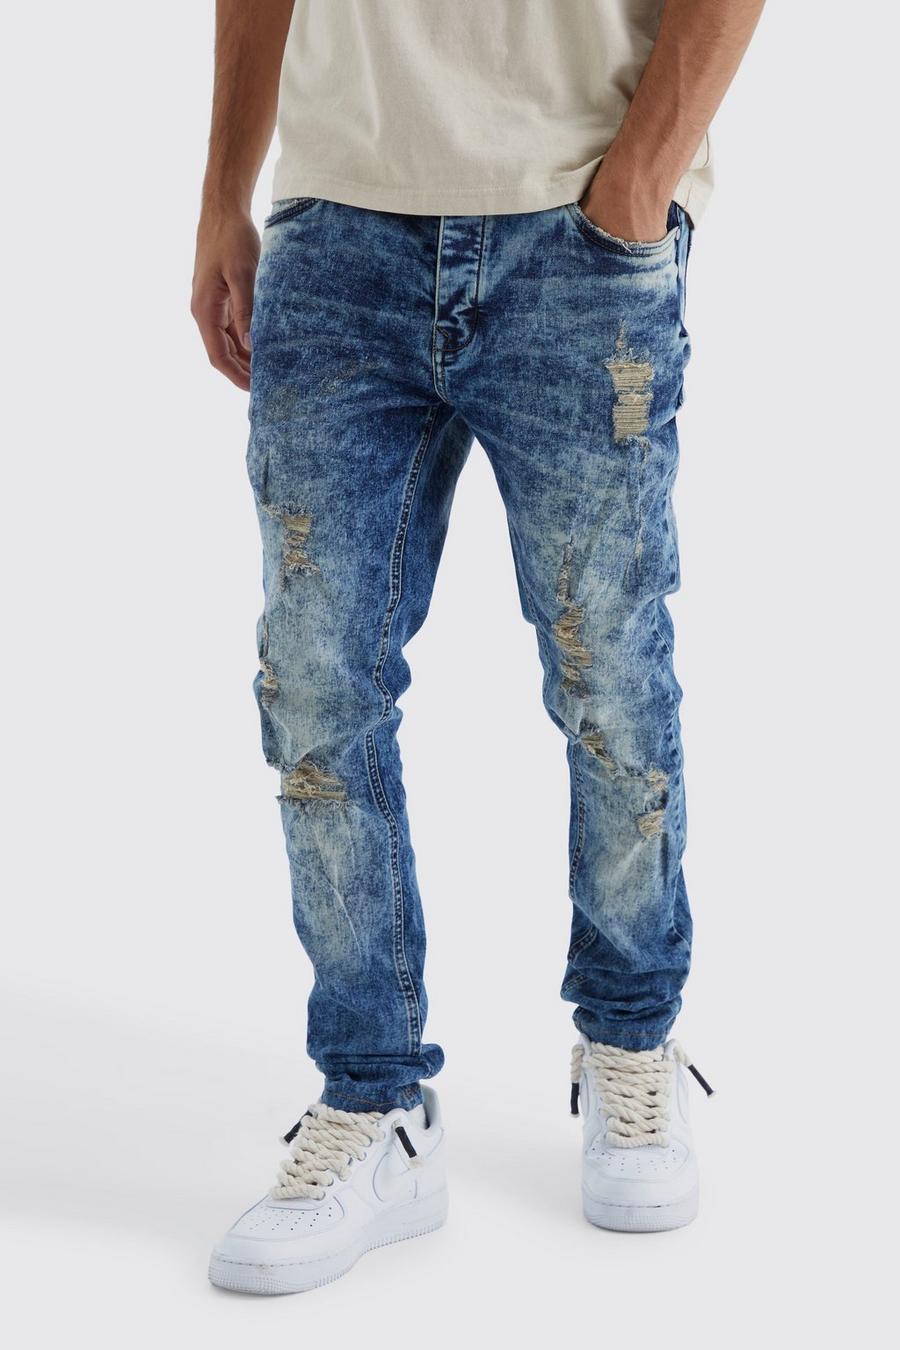 Mens Ripped Distressed Skinny Jeans Denim Pants Casual Stretch Slim Fit  Trousers